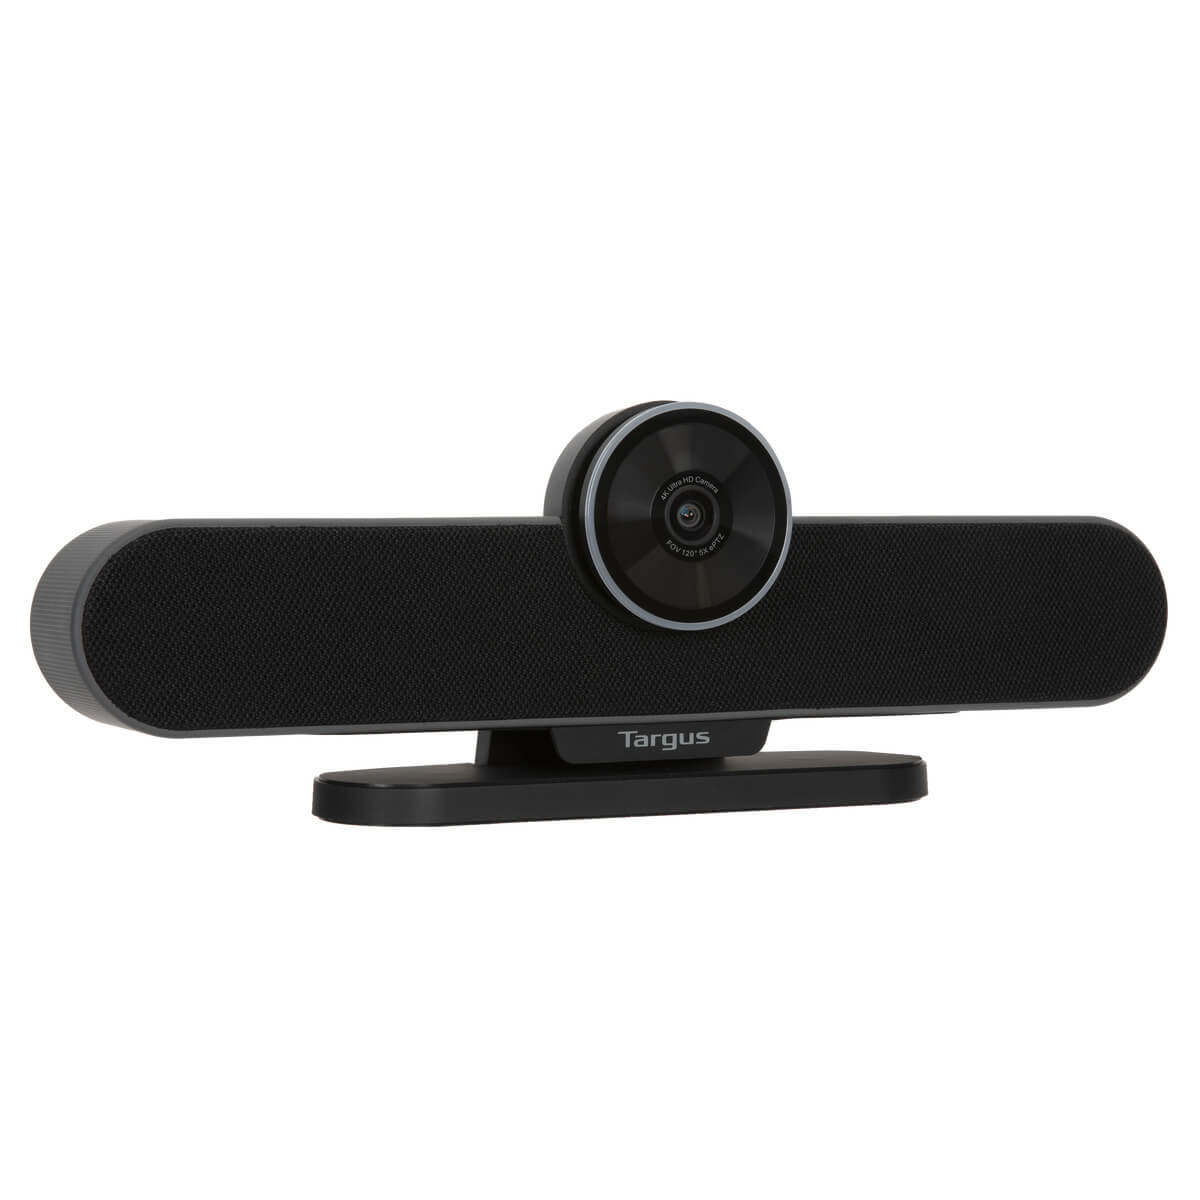 Targus All-in-One 4K Video Conference System (European Plug)